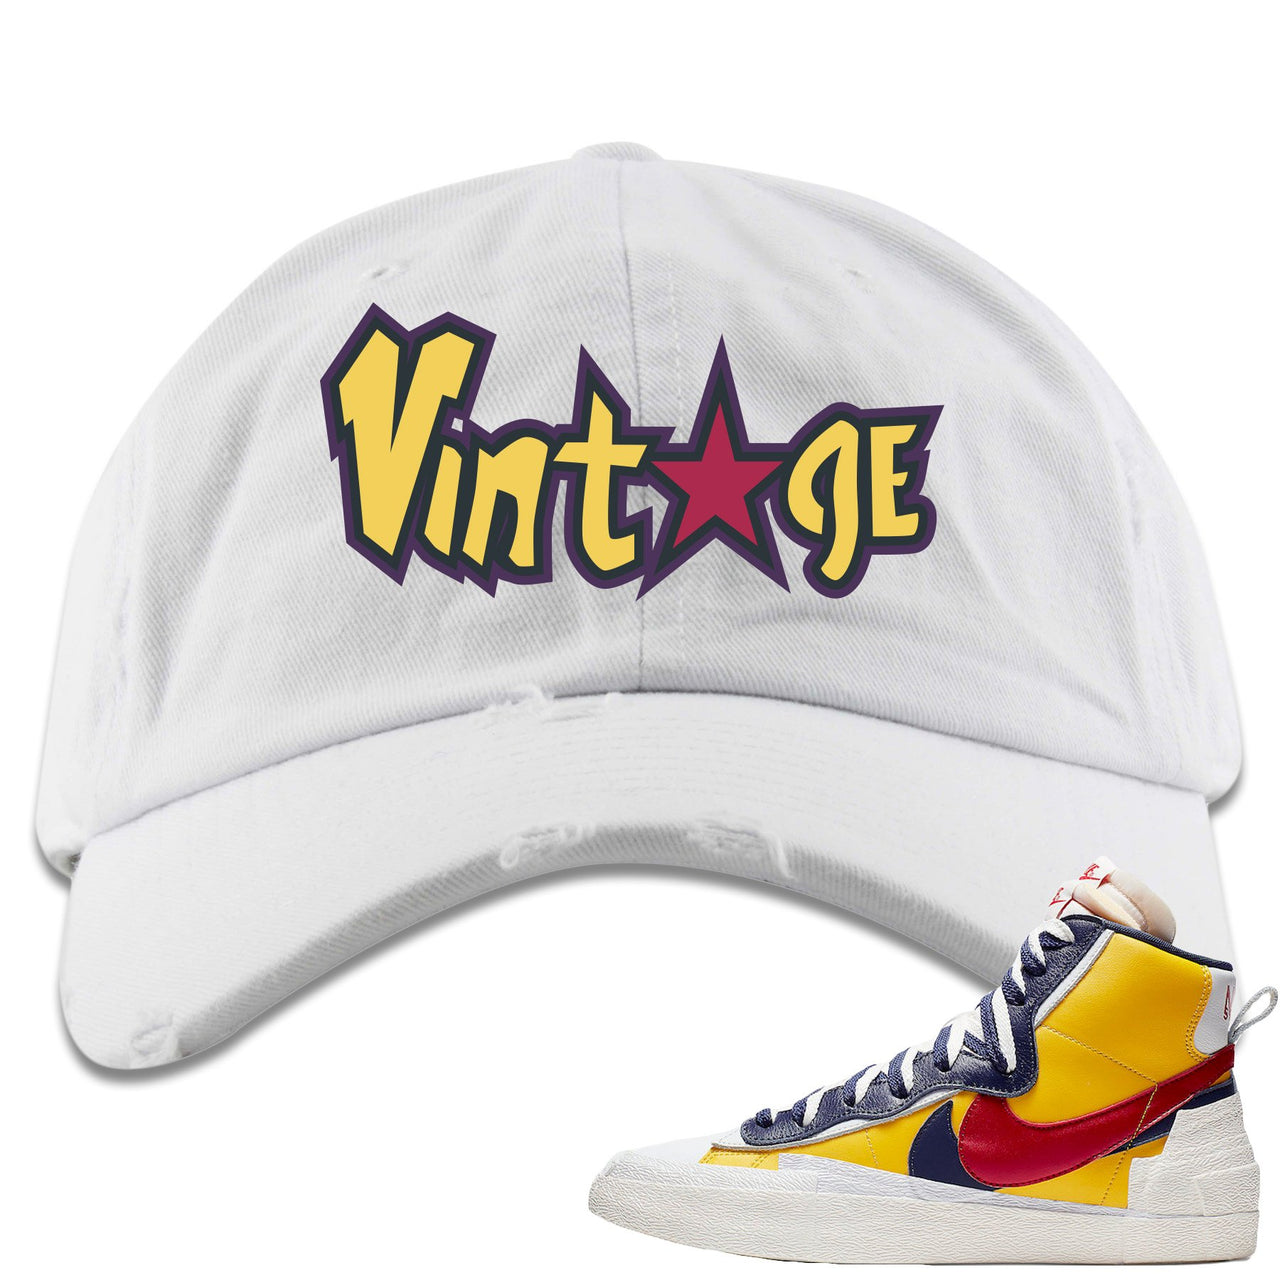 Varsity Maize Mid Blazers Distressed Dad Hat Vintage with Star Logo, White